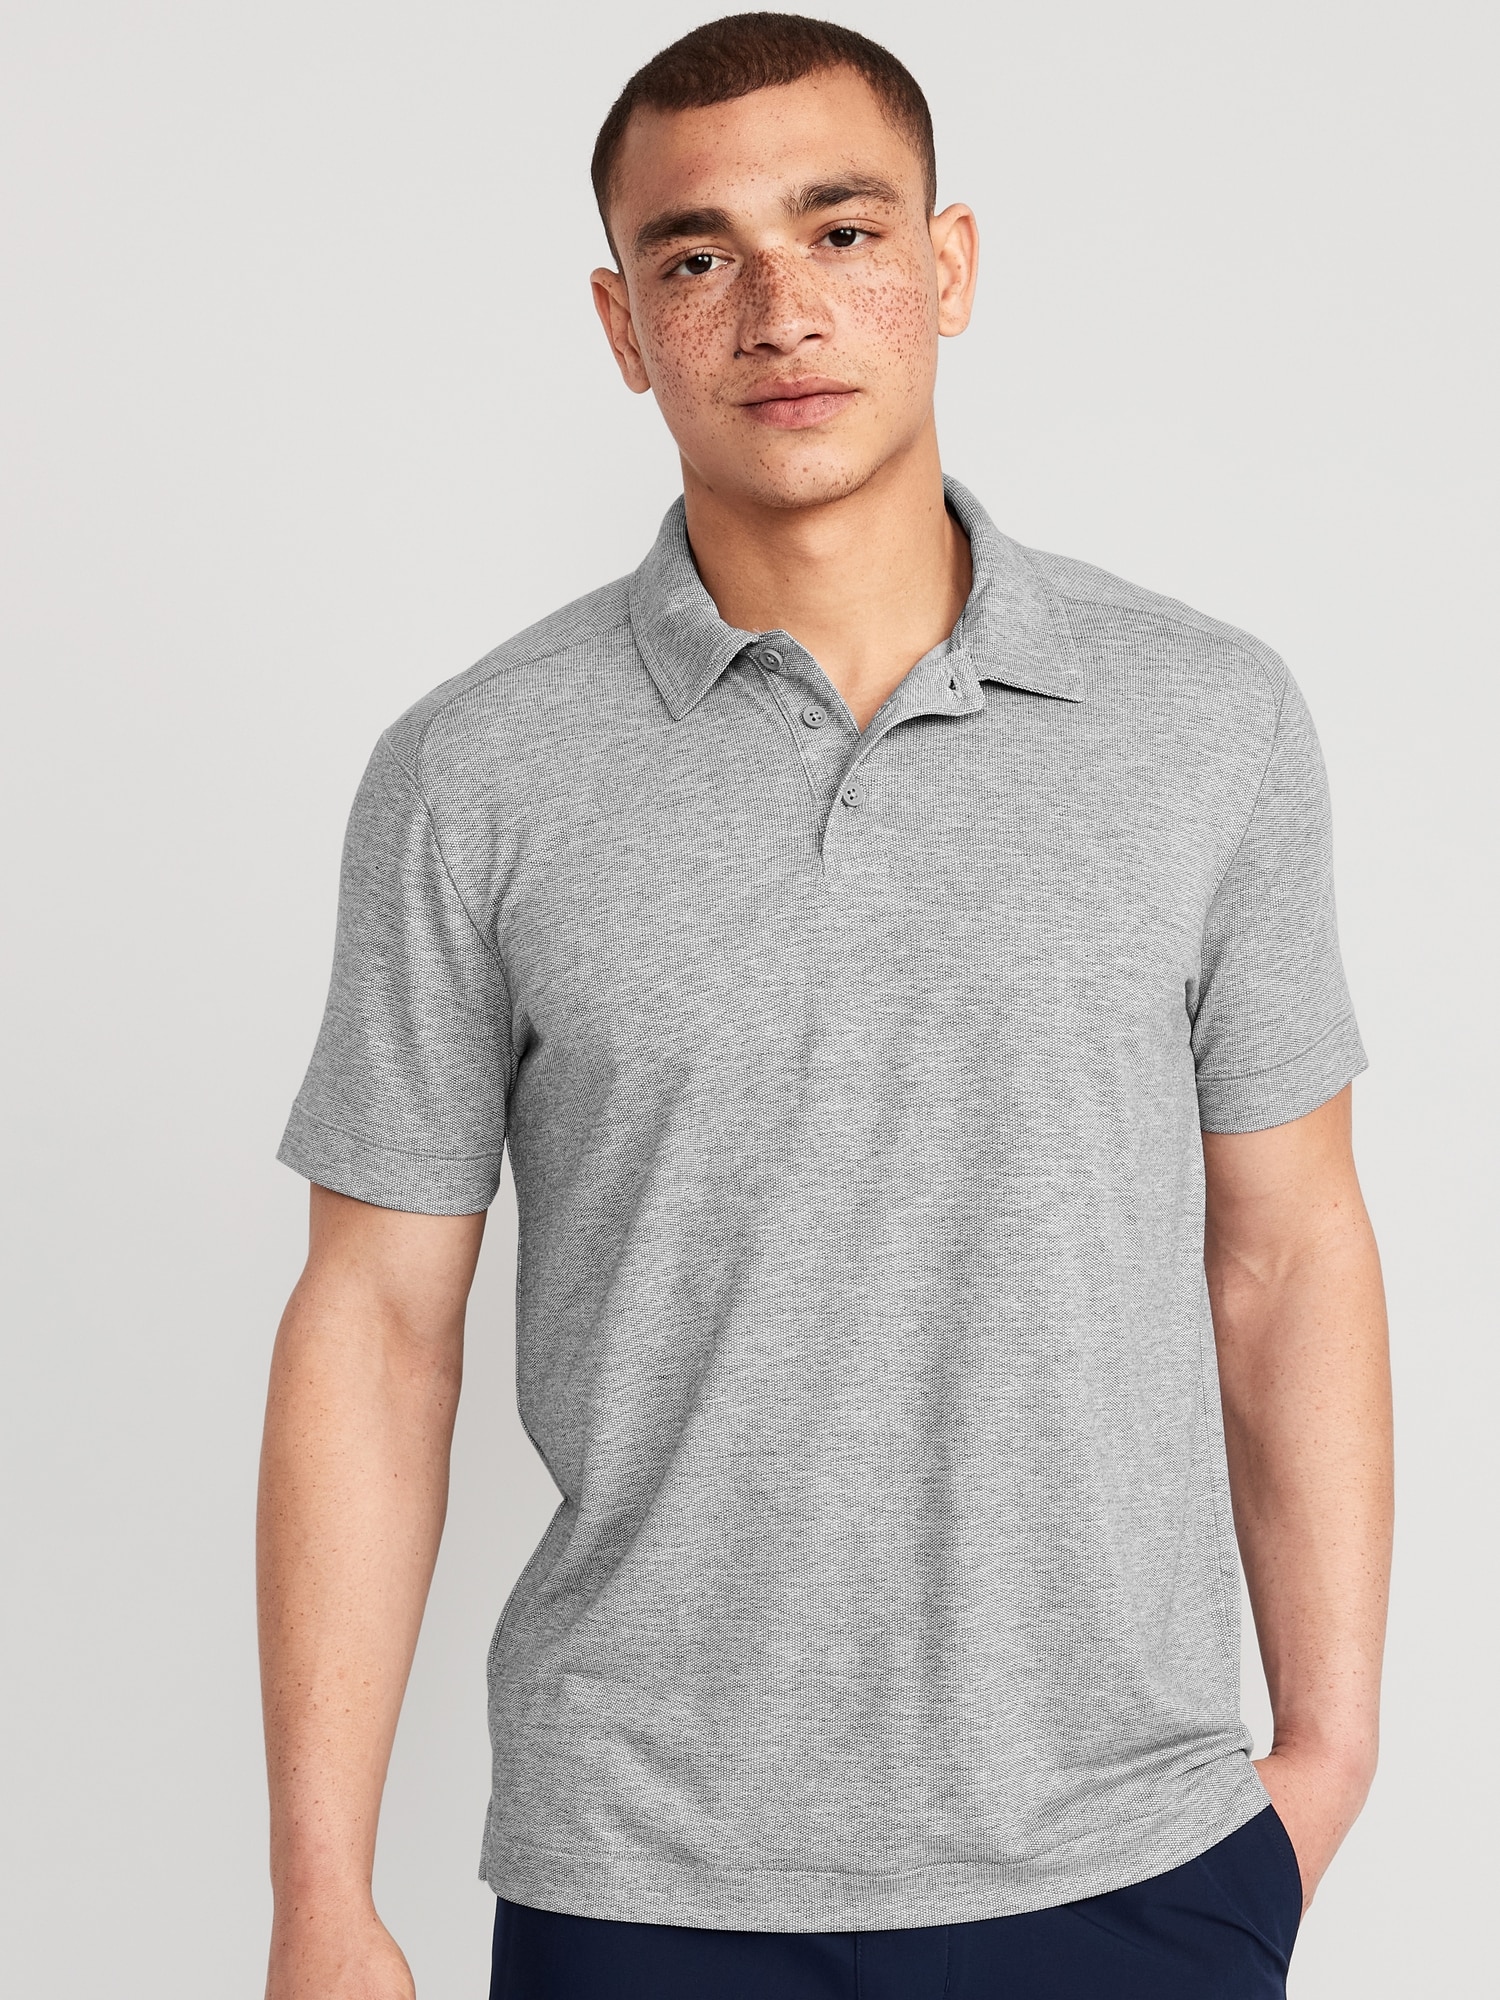 Old Navy Performance Beyond Pique Polo for Men gray. 1